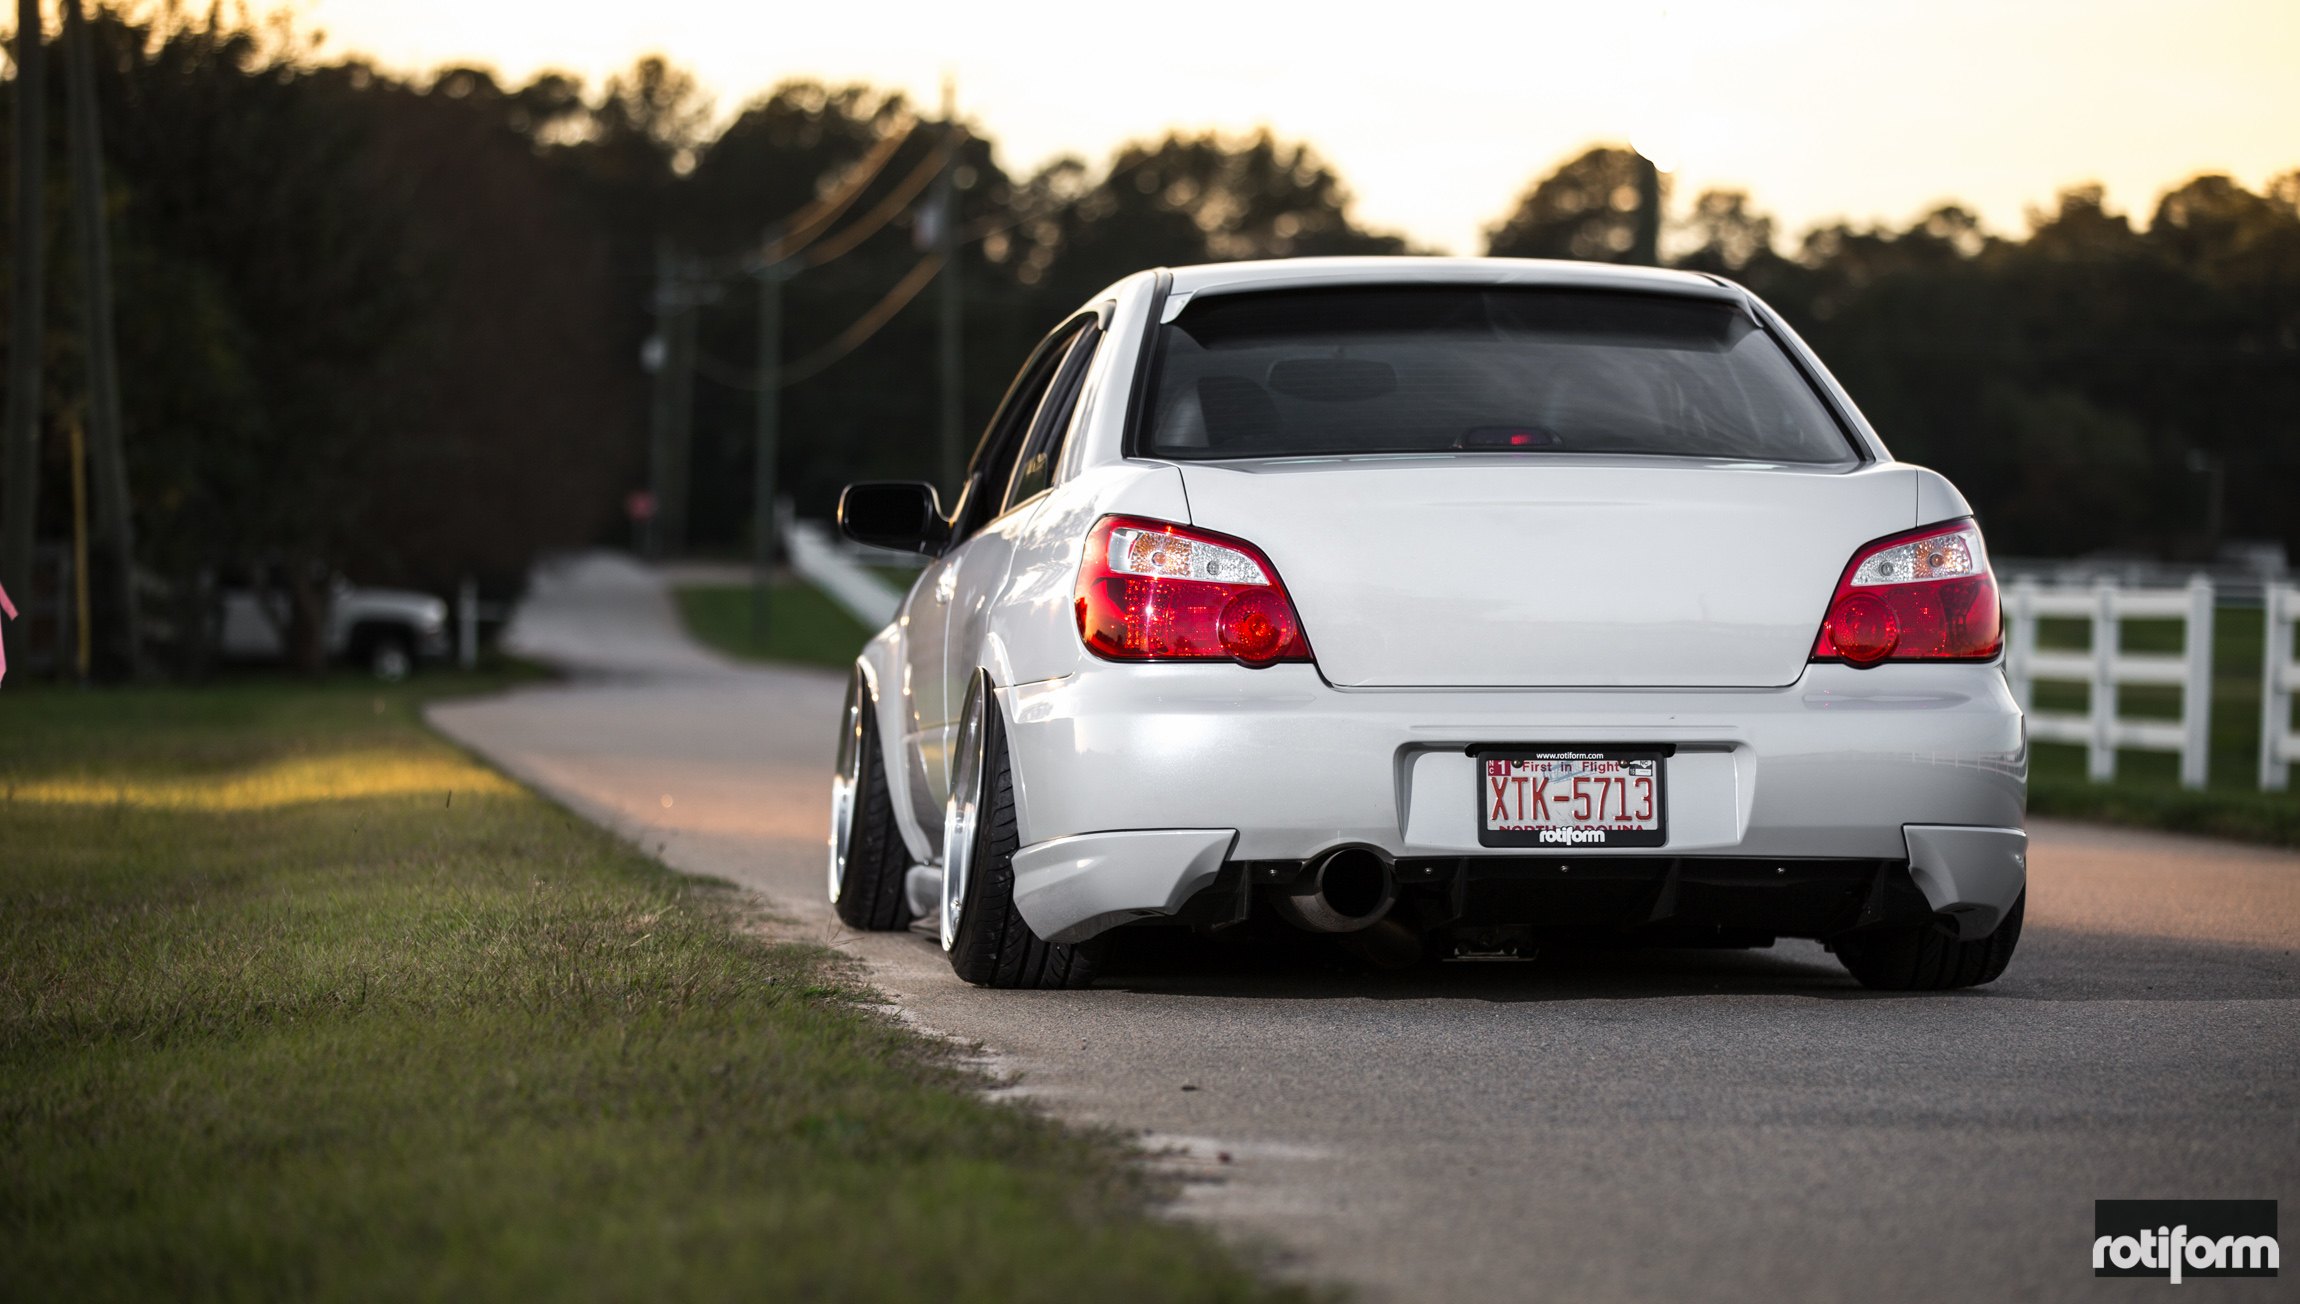 White Subaru WRX with Aftermarket Rear Diffuser - Photo by Rotiform